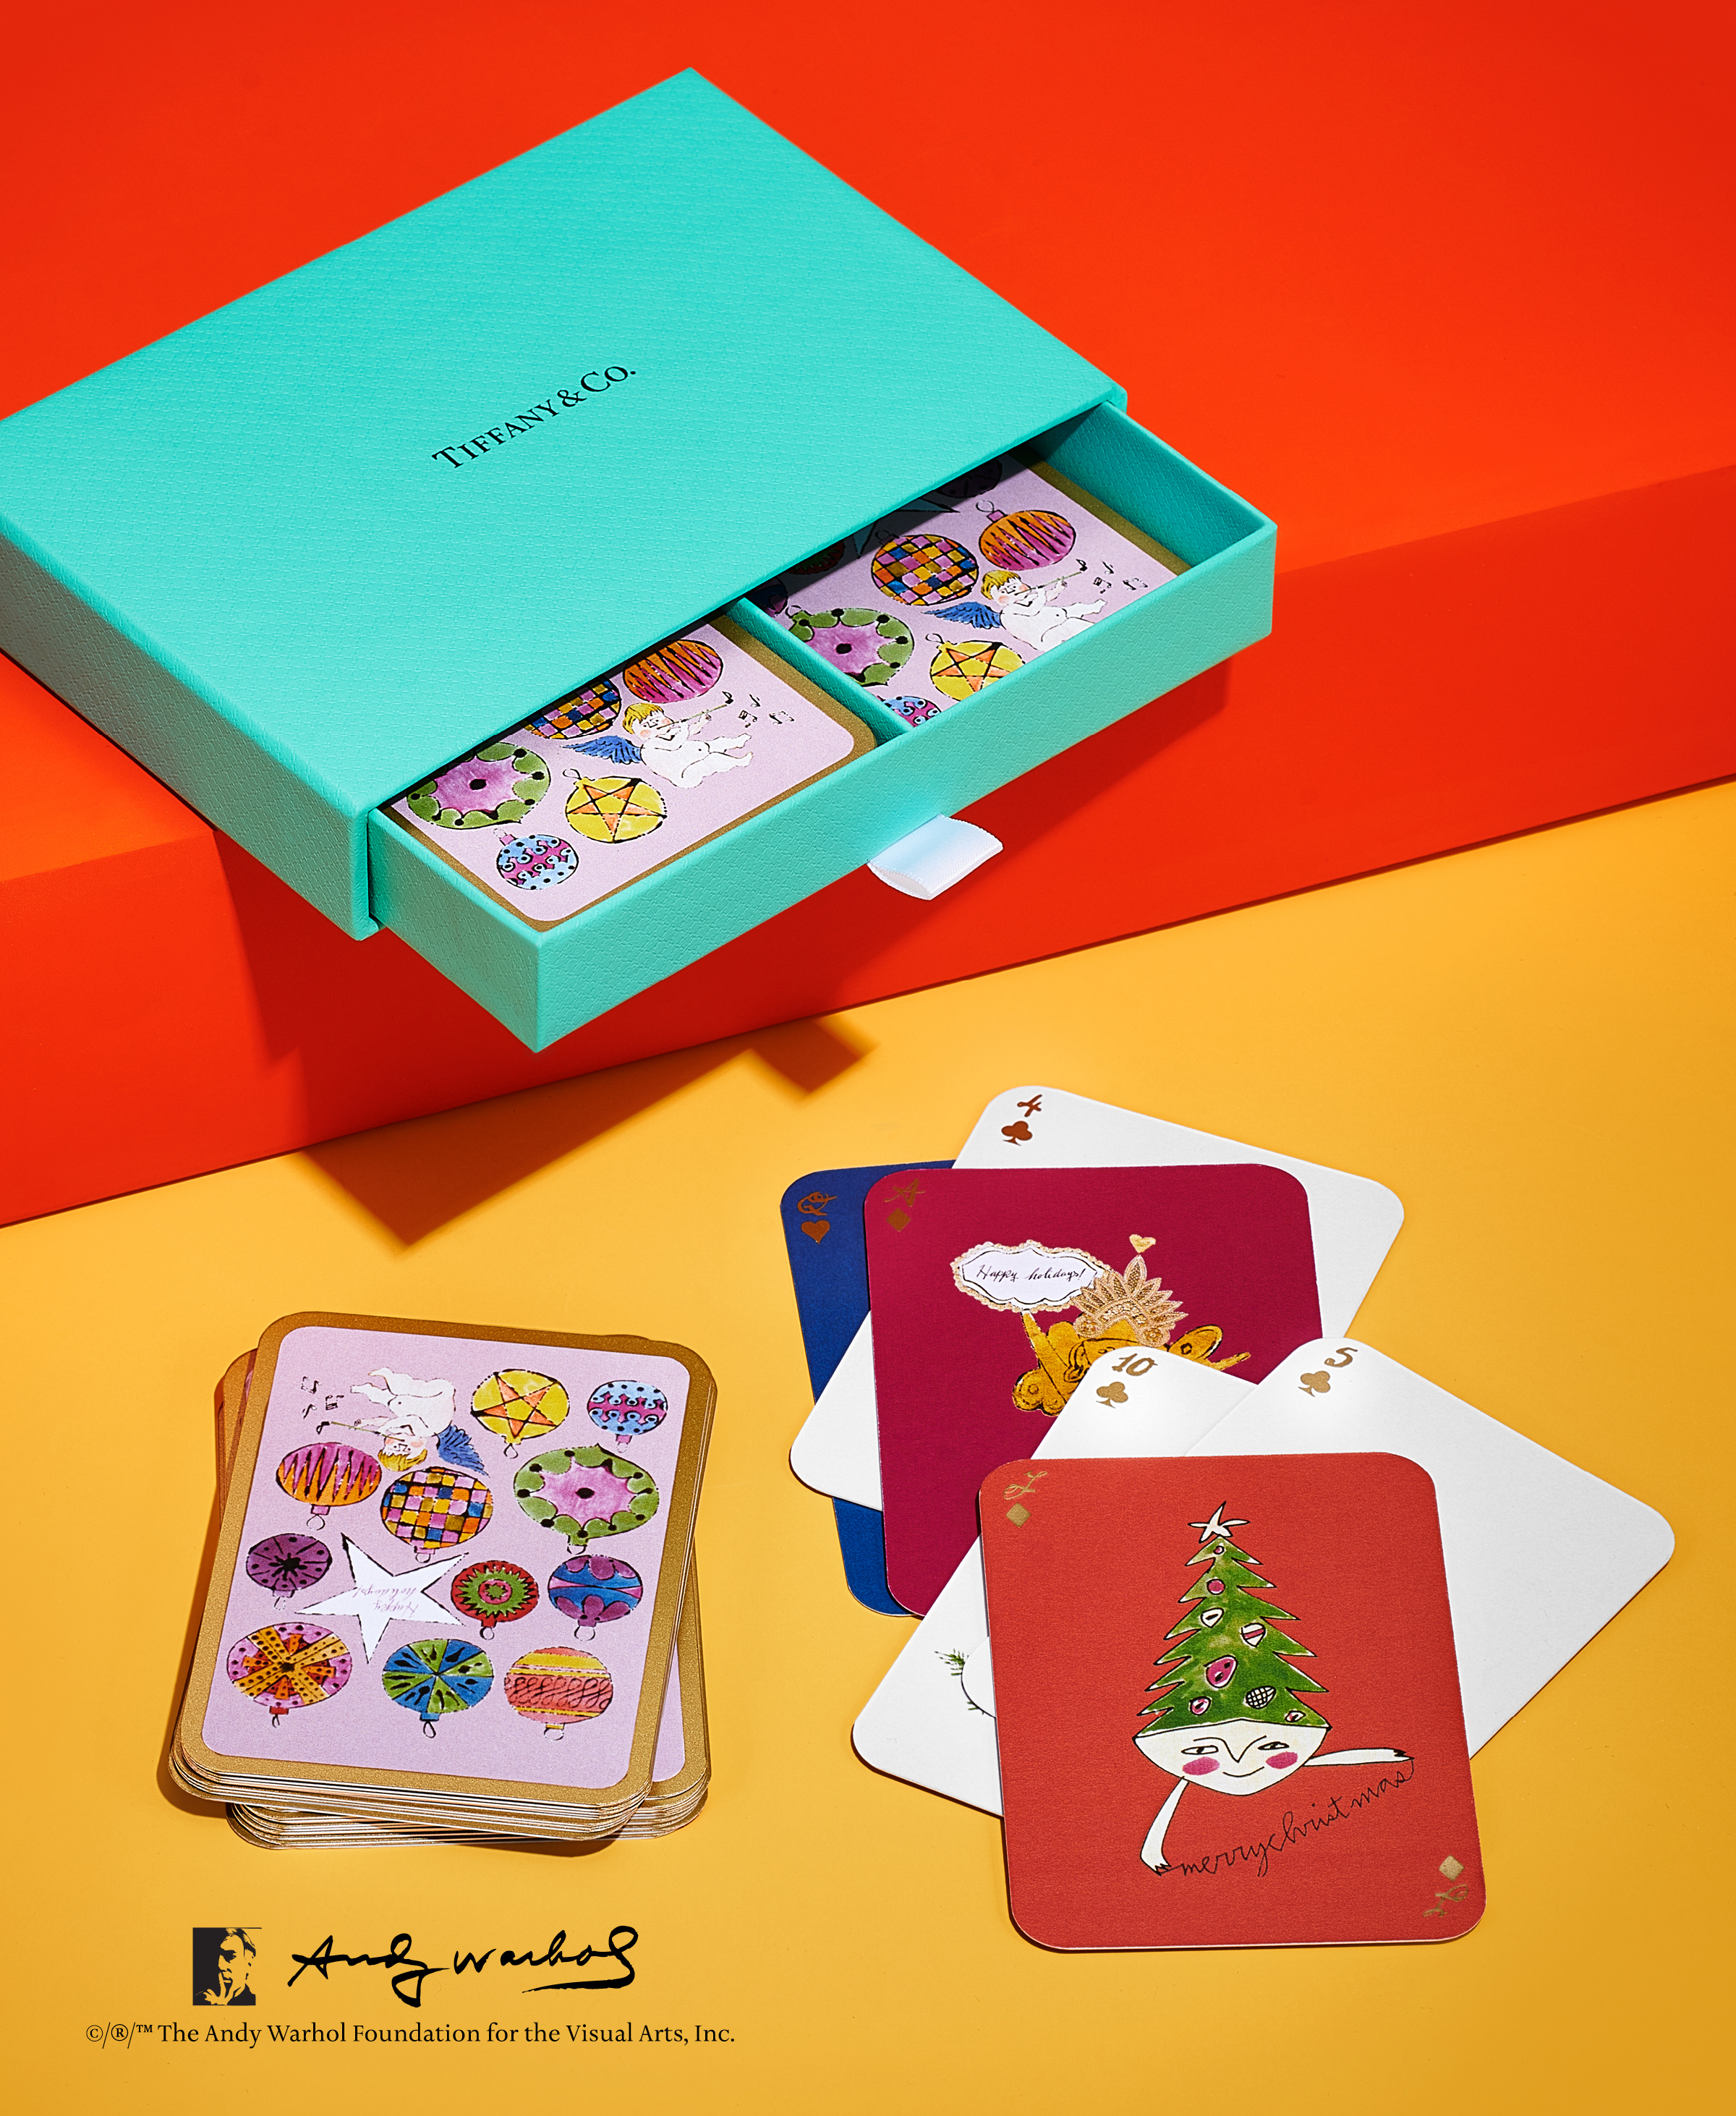 Tiffany & Co. x Andy Warhol limited-edition playing cards, set of